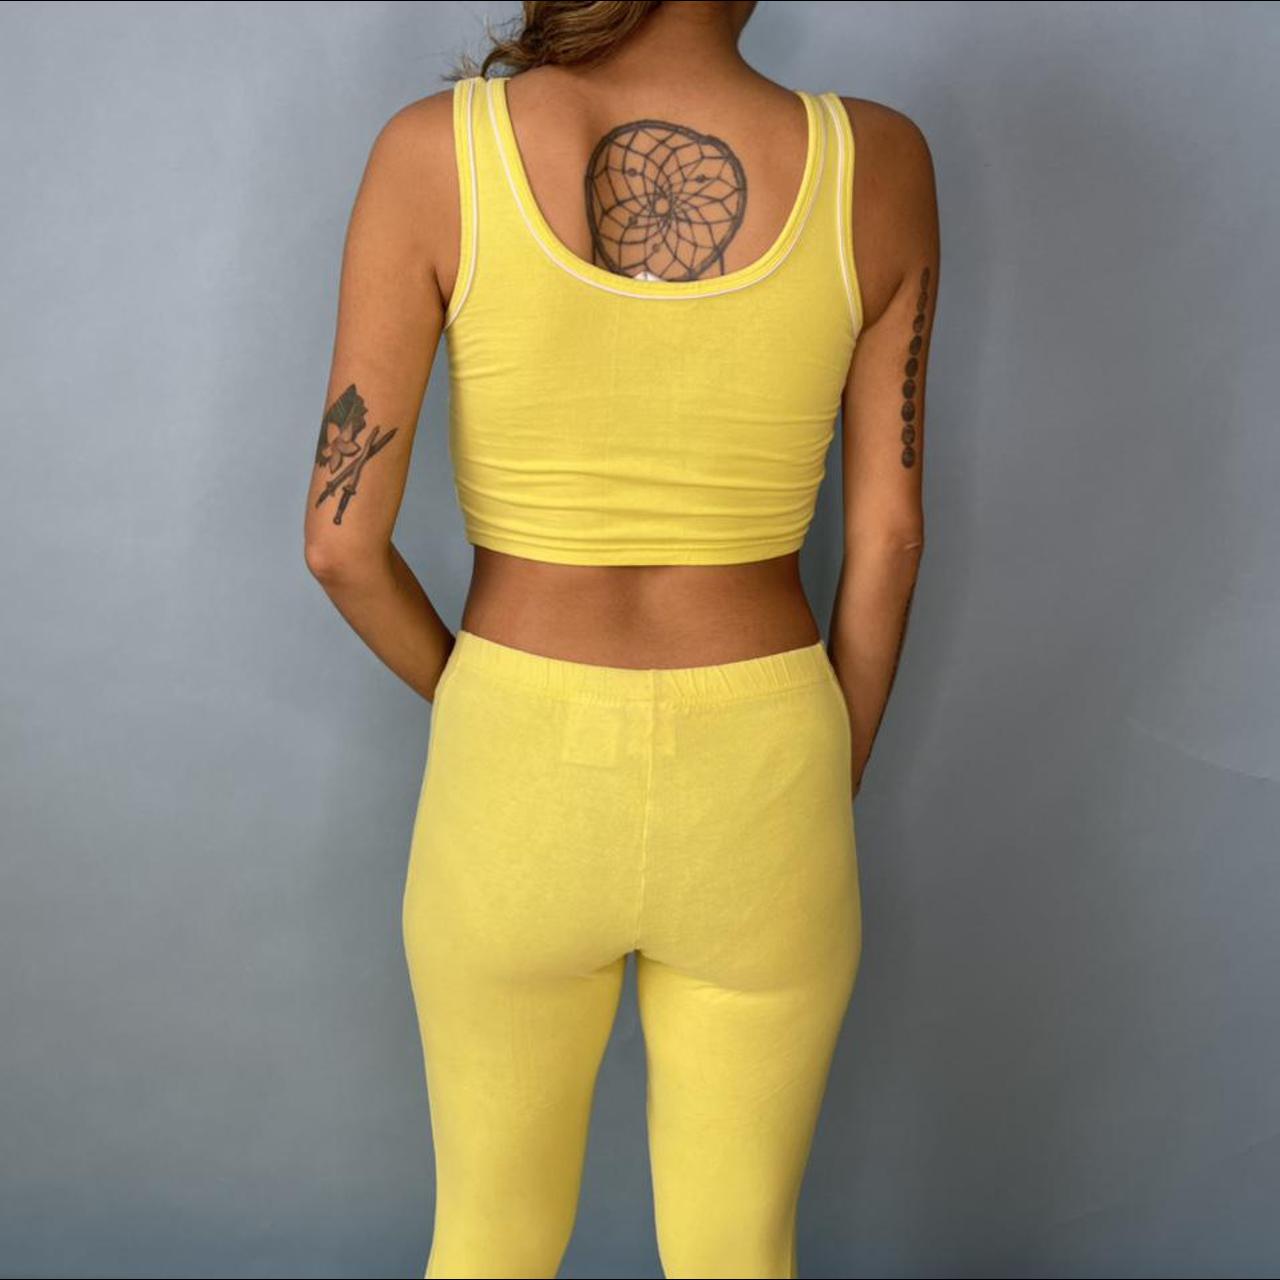 Nike Women's Yellow and Black Suit (3)